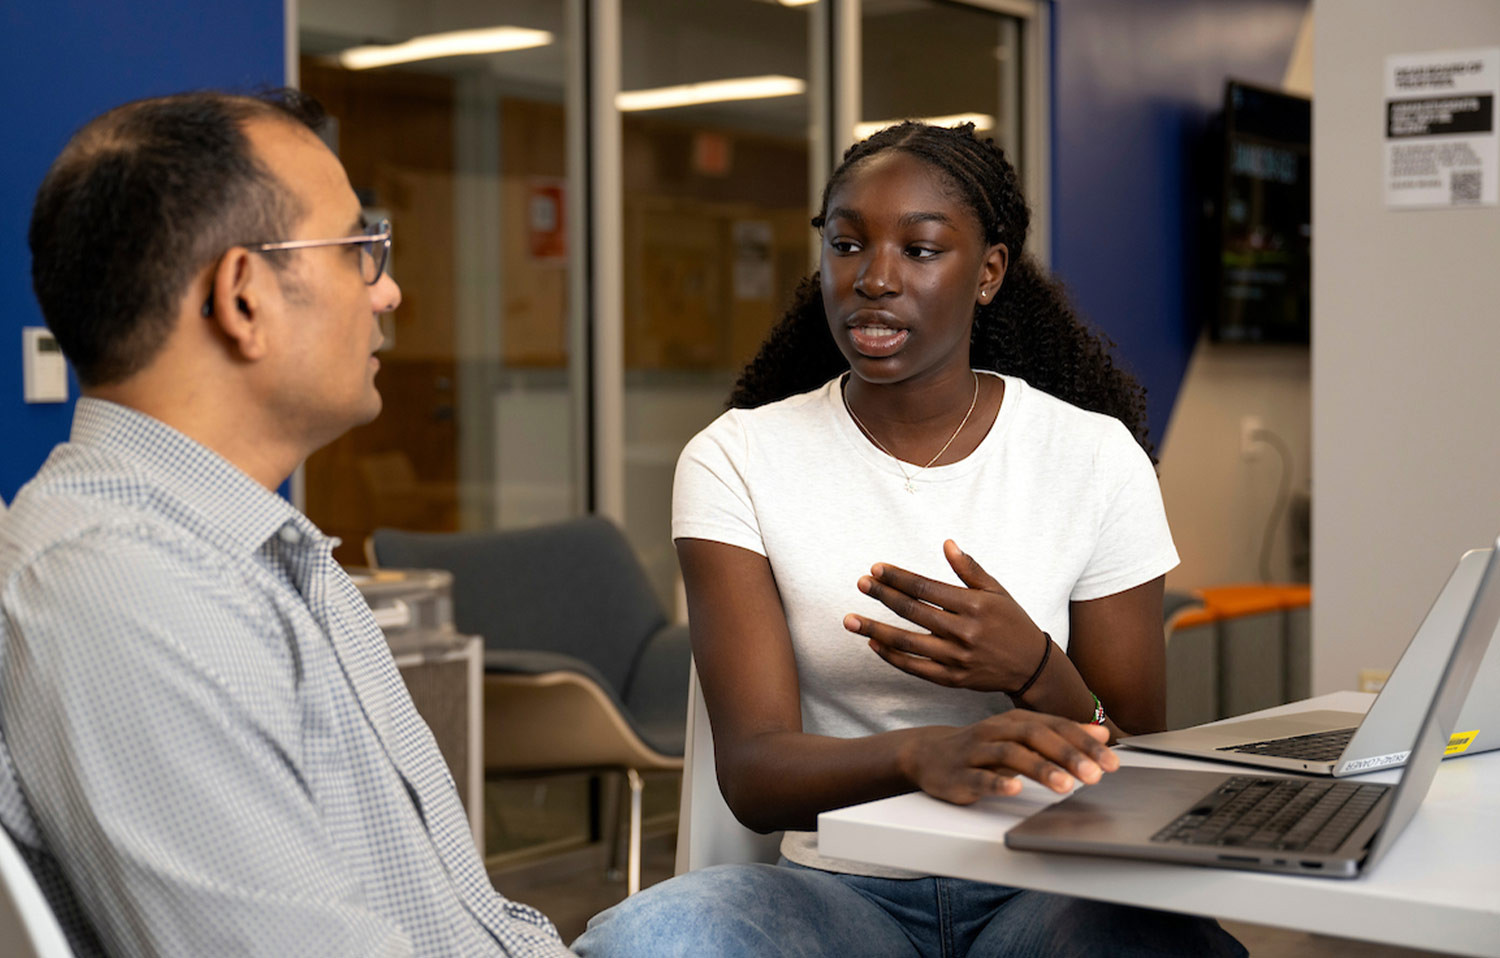 Amanda Agambire sit at a laptop in a workspace while in mid discussion with mentor Professor Rajesh Kumar